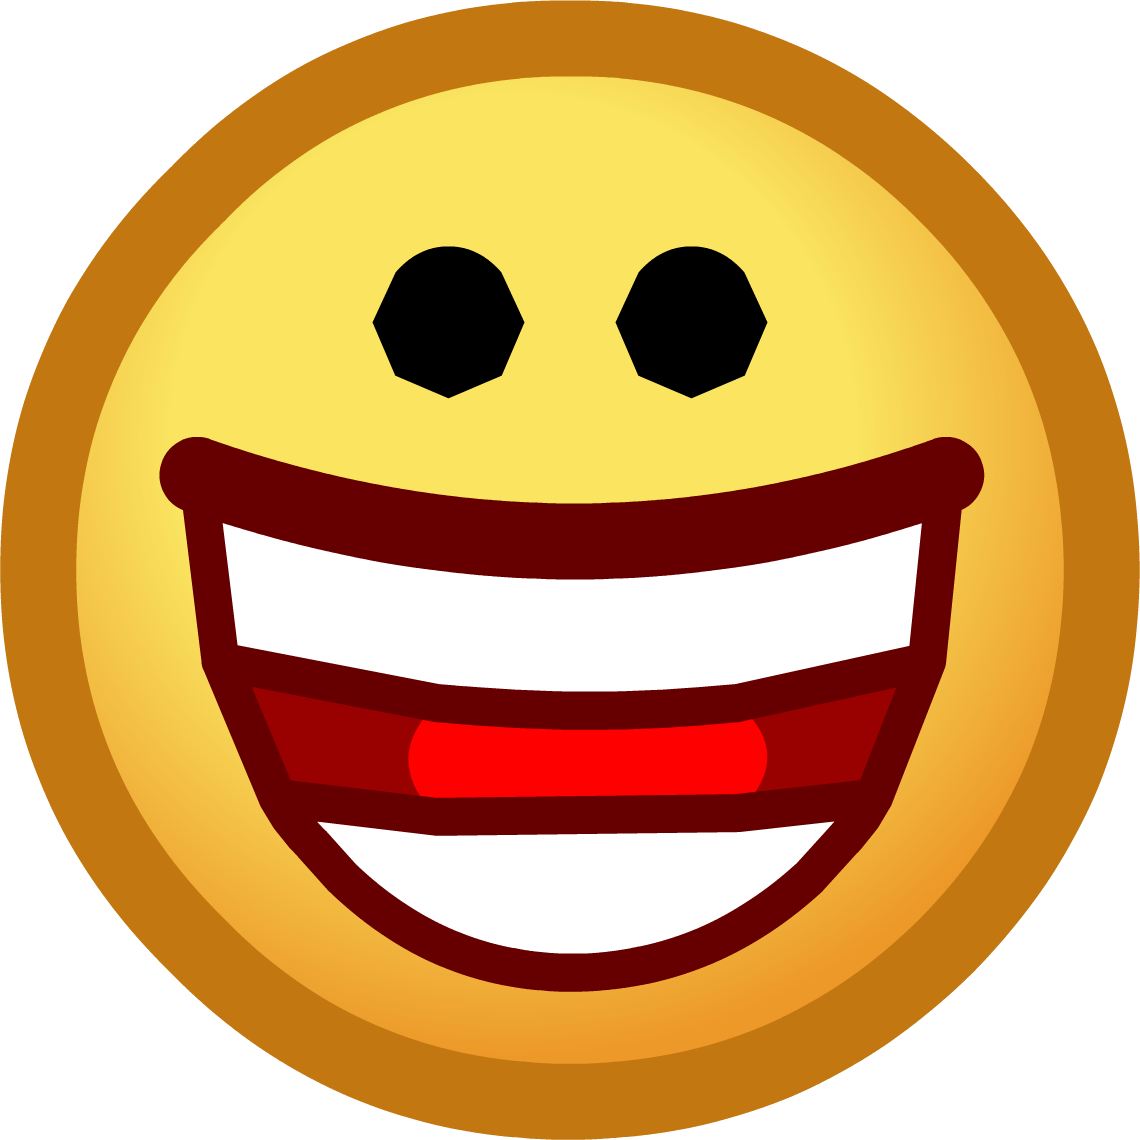 Free PNG HD Laughing Face - 146948